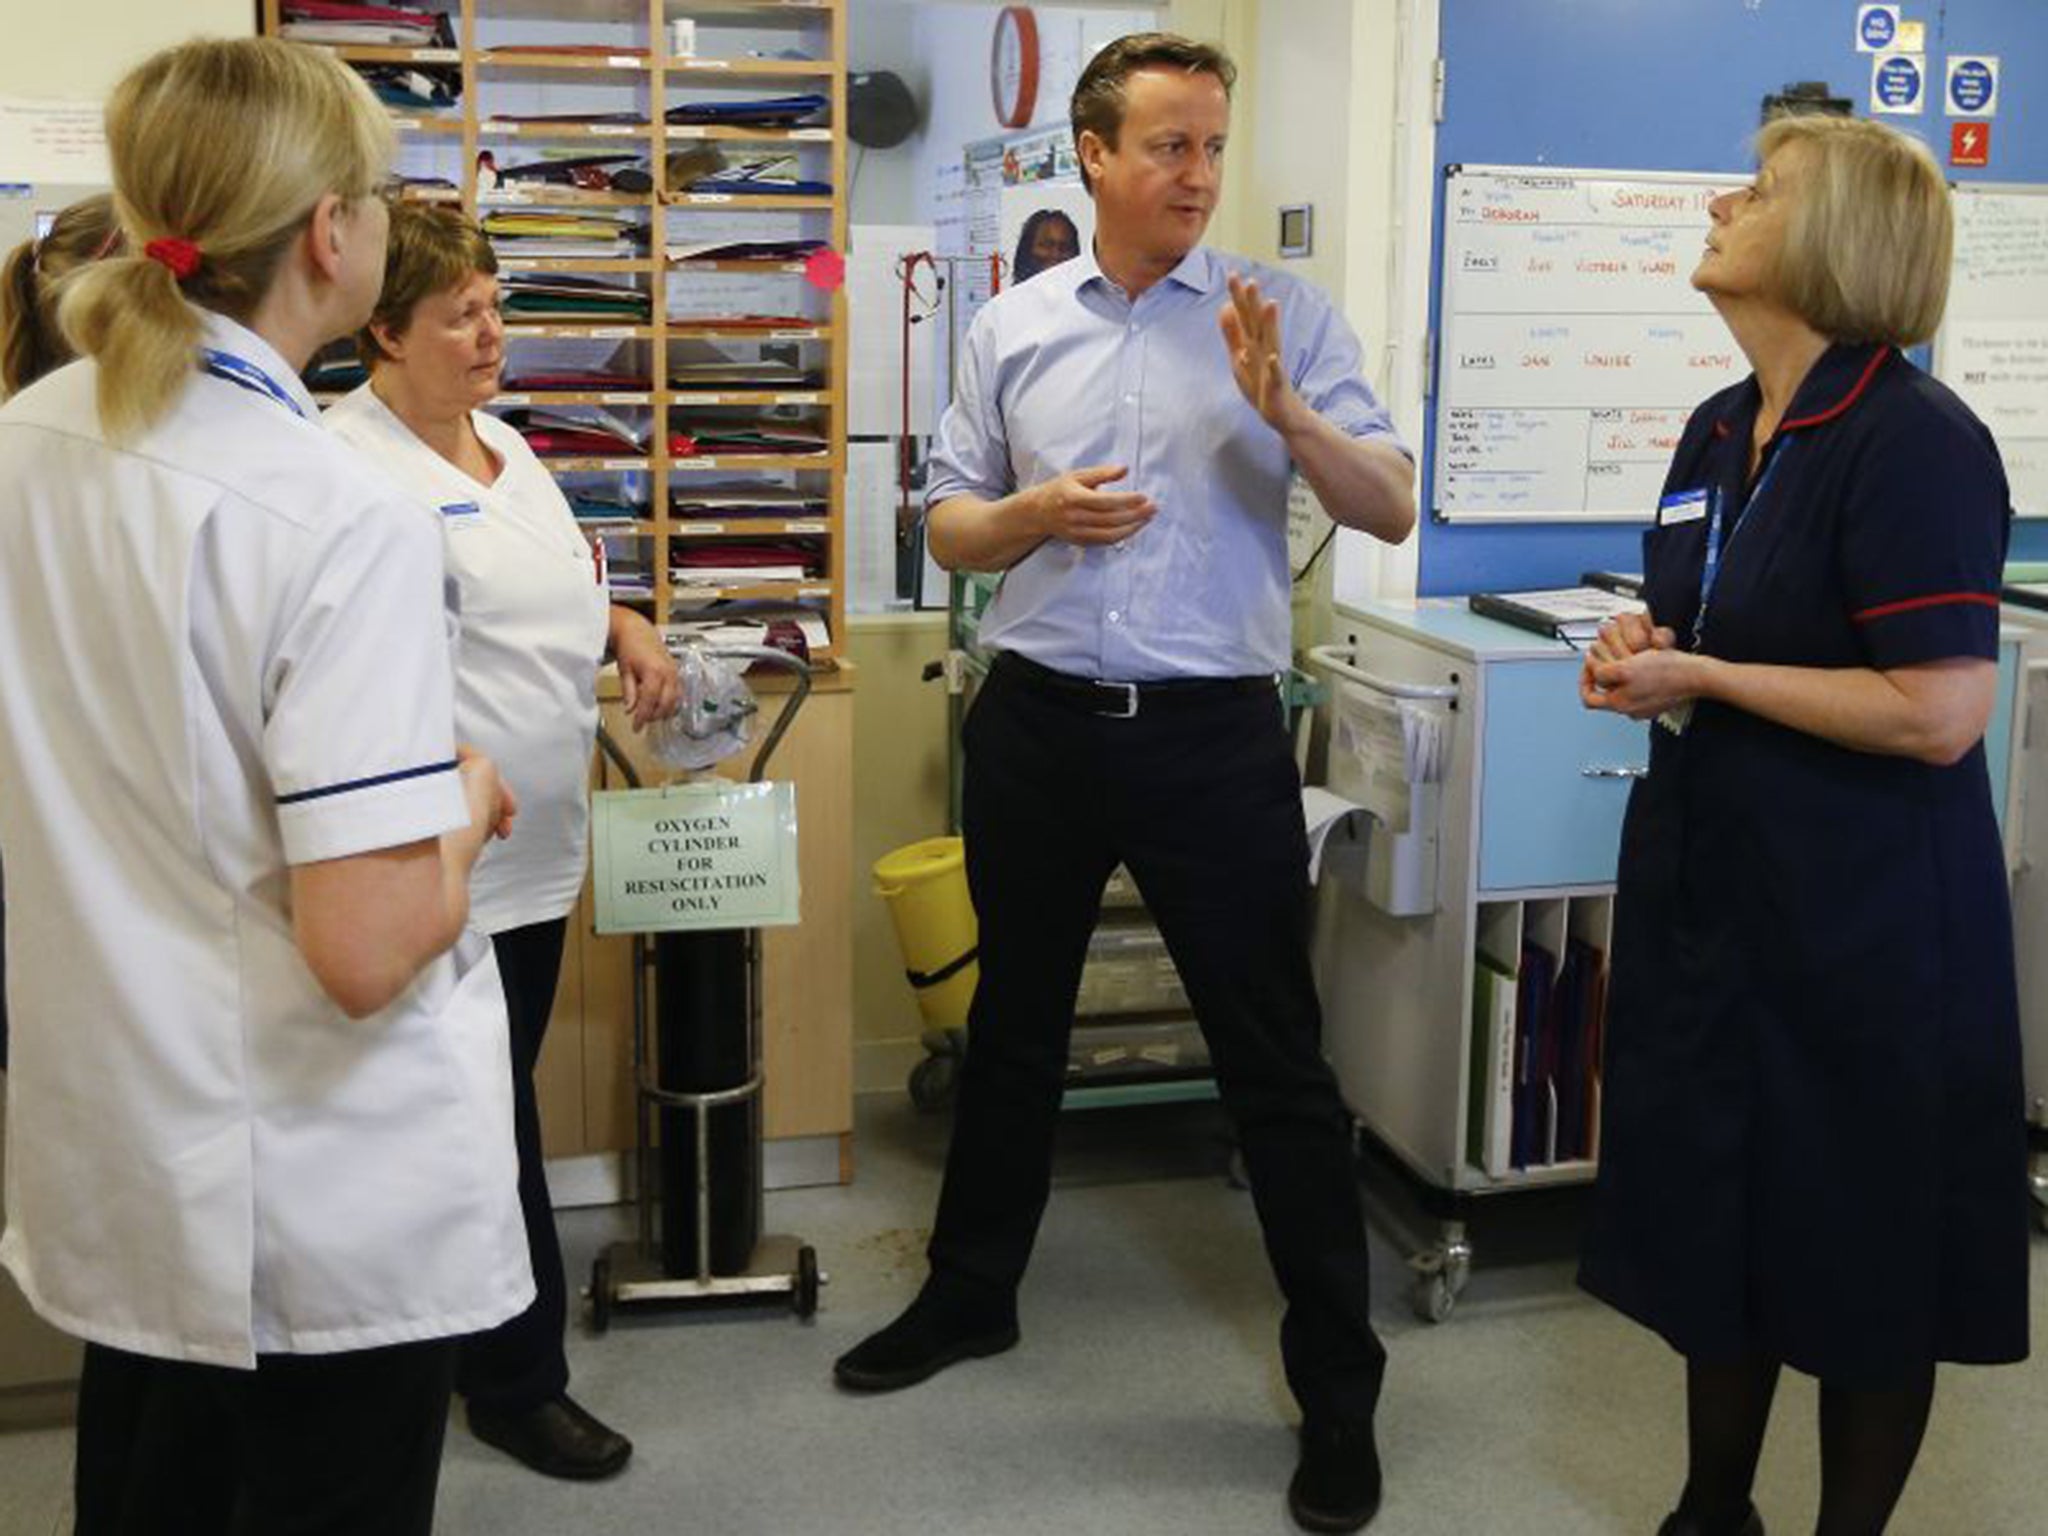 David Cameron has reiterated his pre-election promise to radically improve the NHS